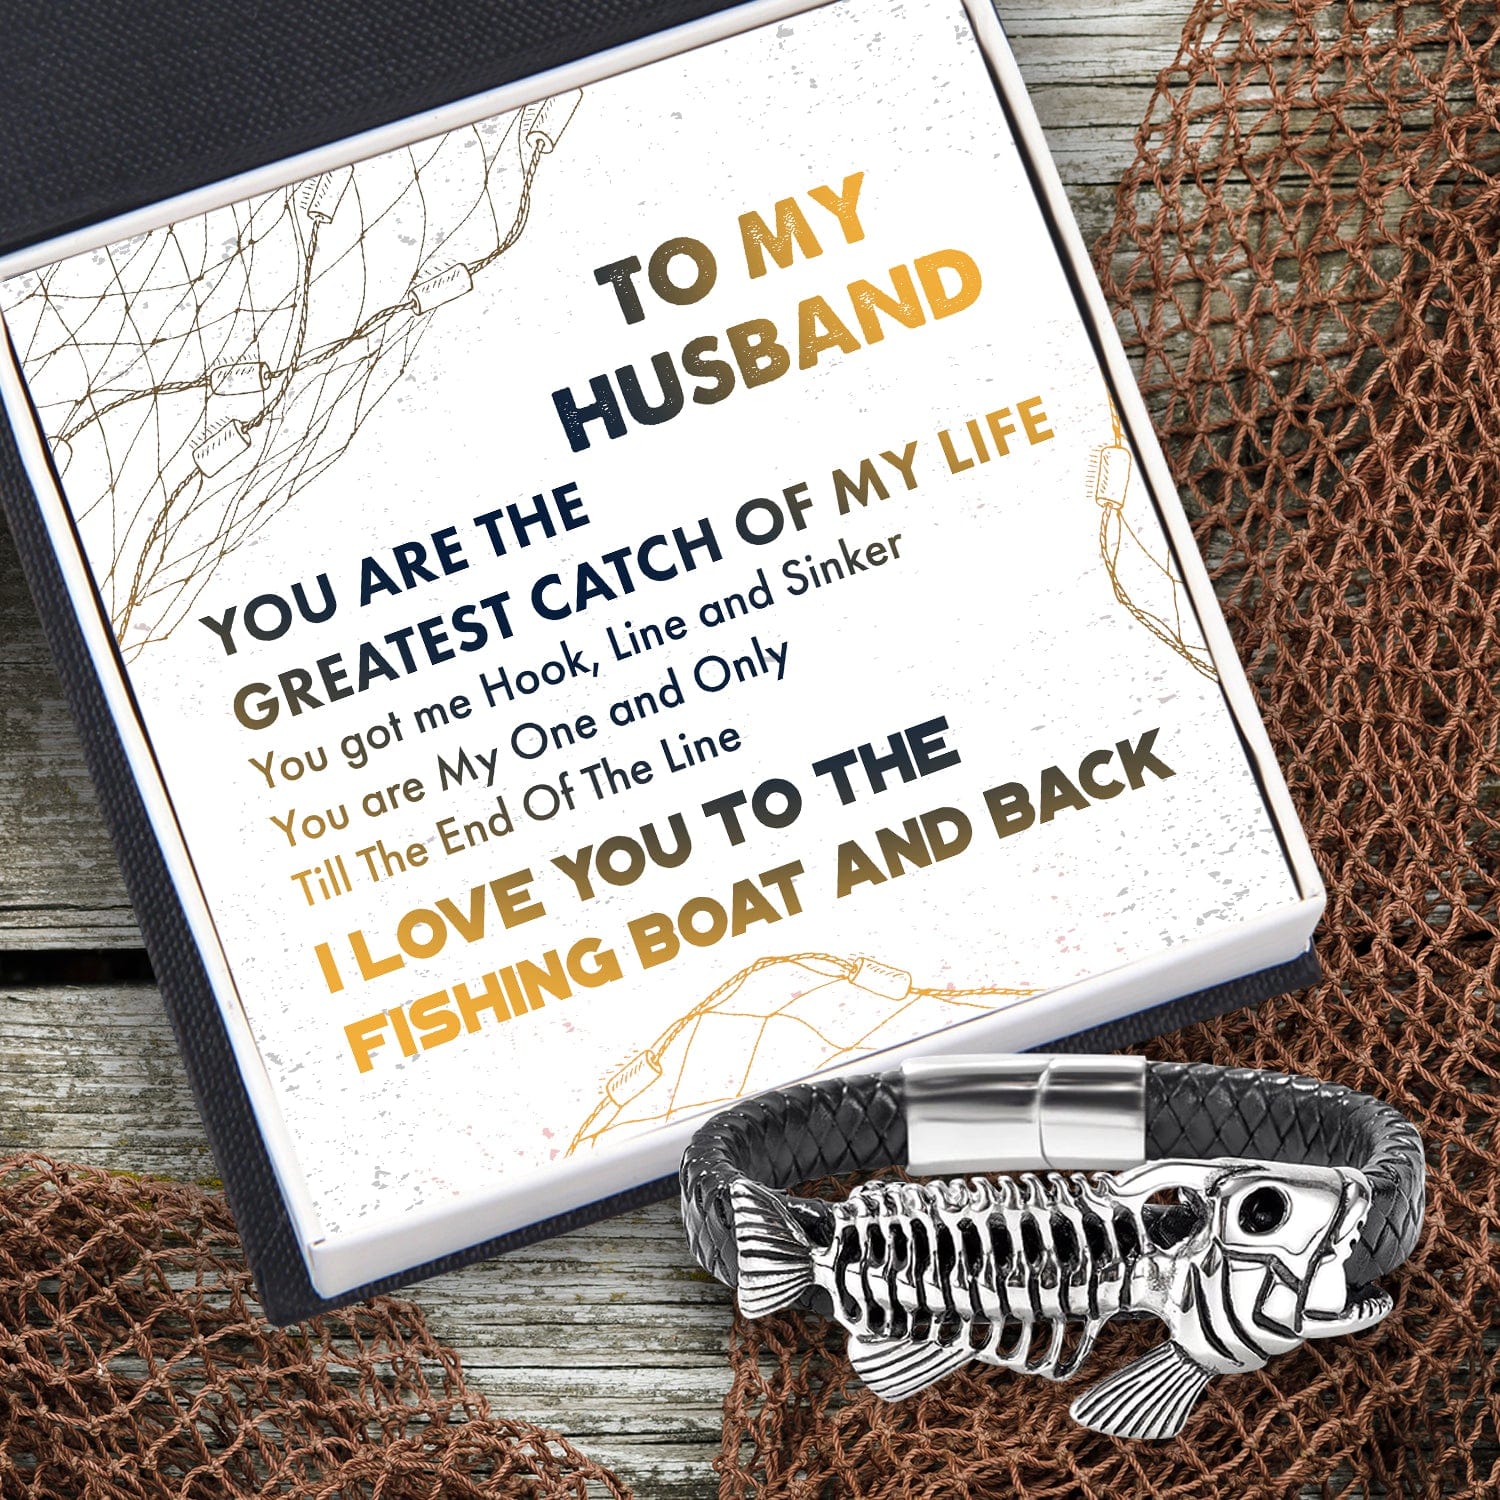 Black Leather Bracelet Fish Bone - Fishing - To My Husband - You Are My One and Only - Gbzr14001